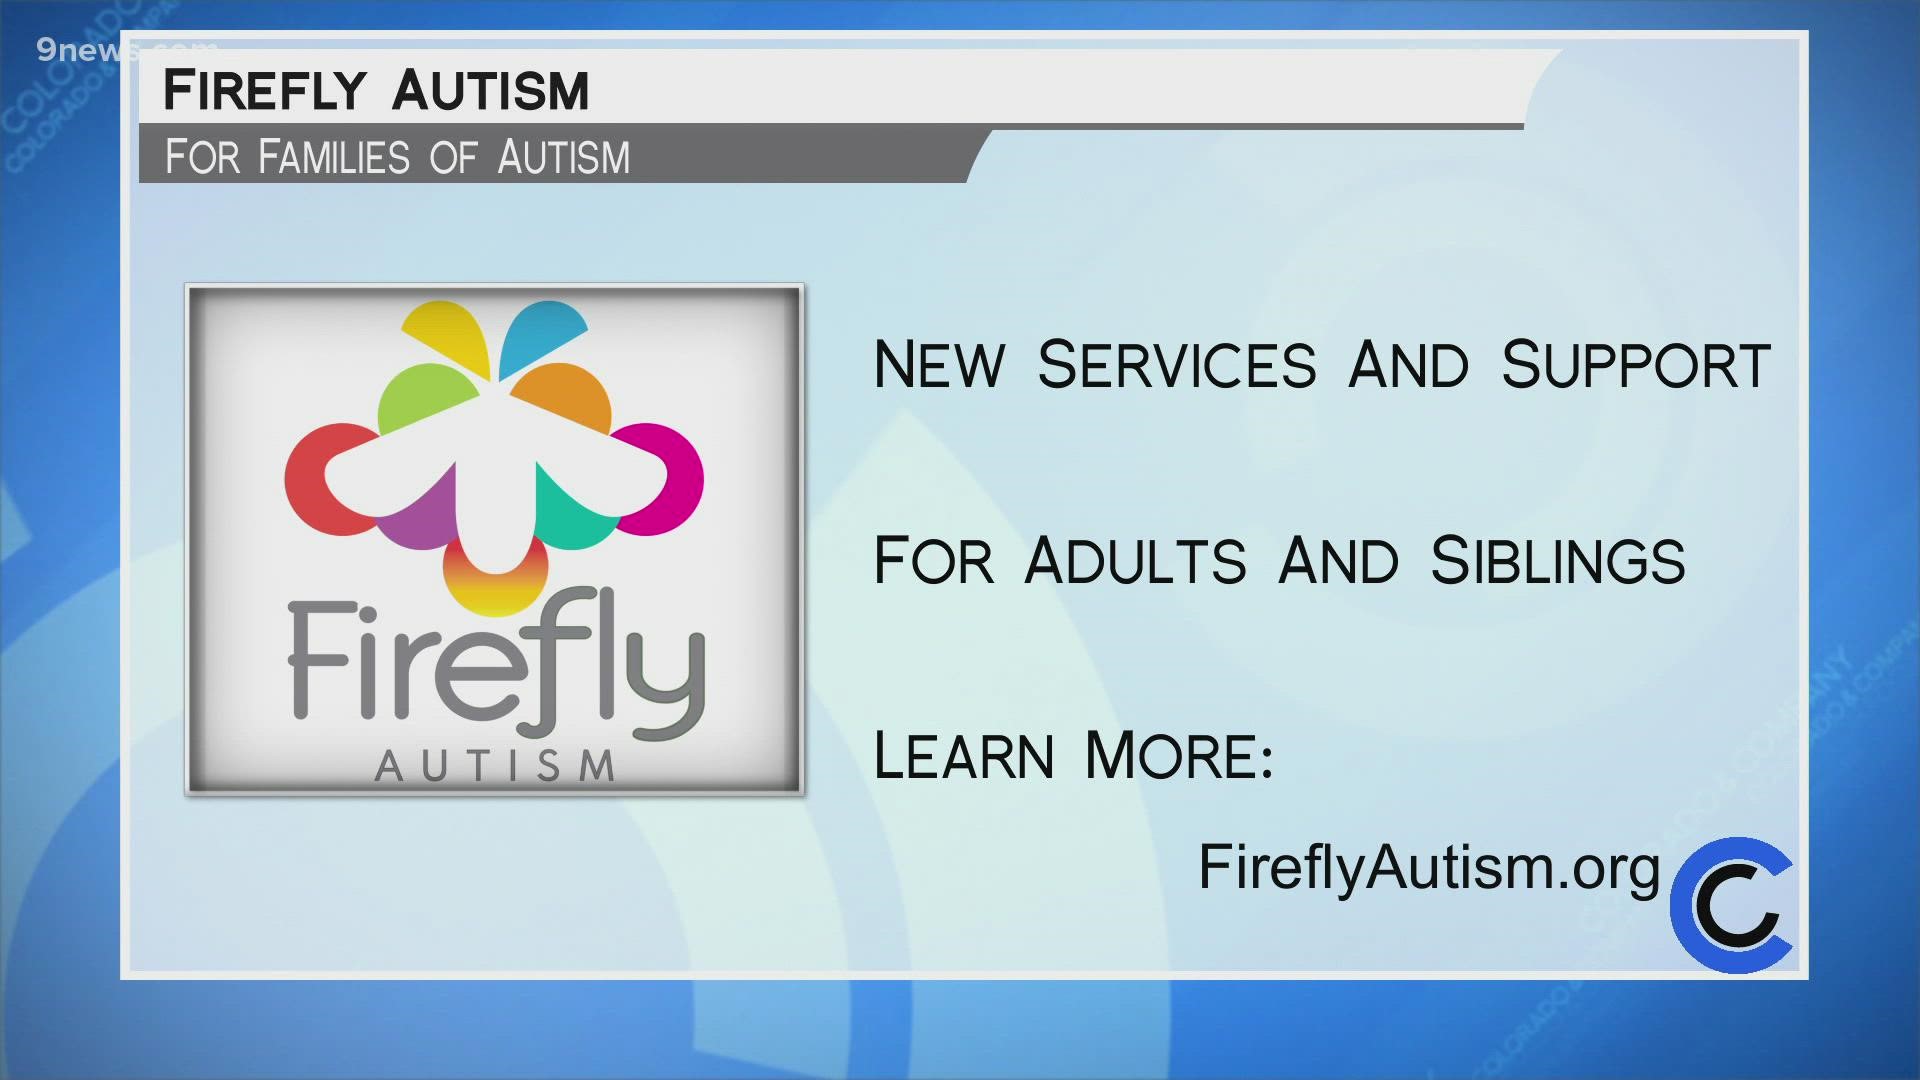 Firefly Autism leads the country in supporting families dealing with Autism. Support their mission and learn more at FireflyAutism.org.